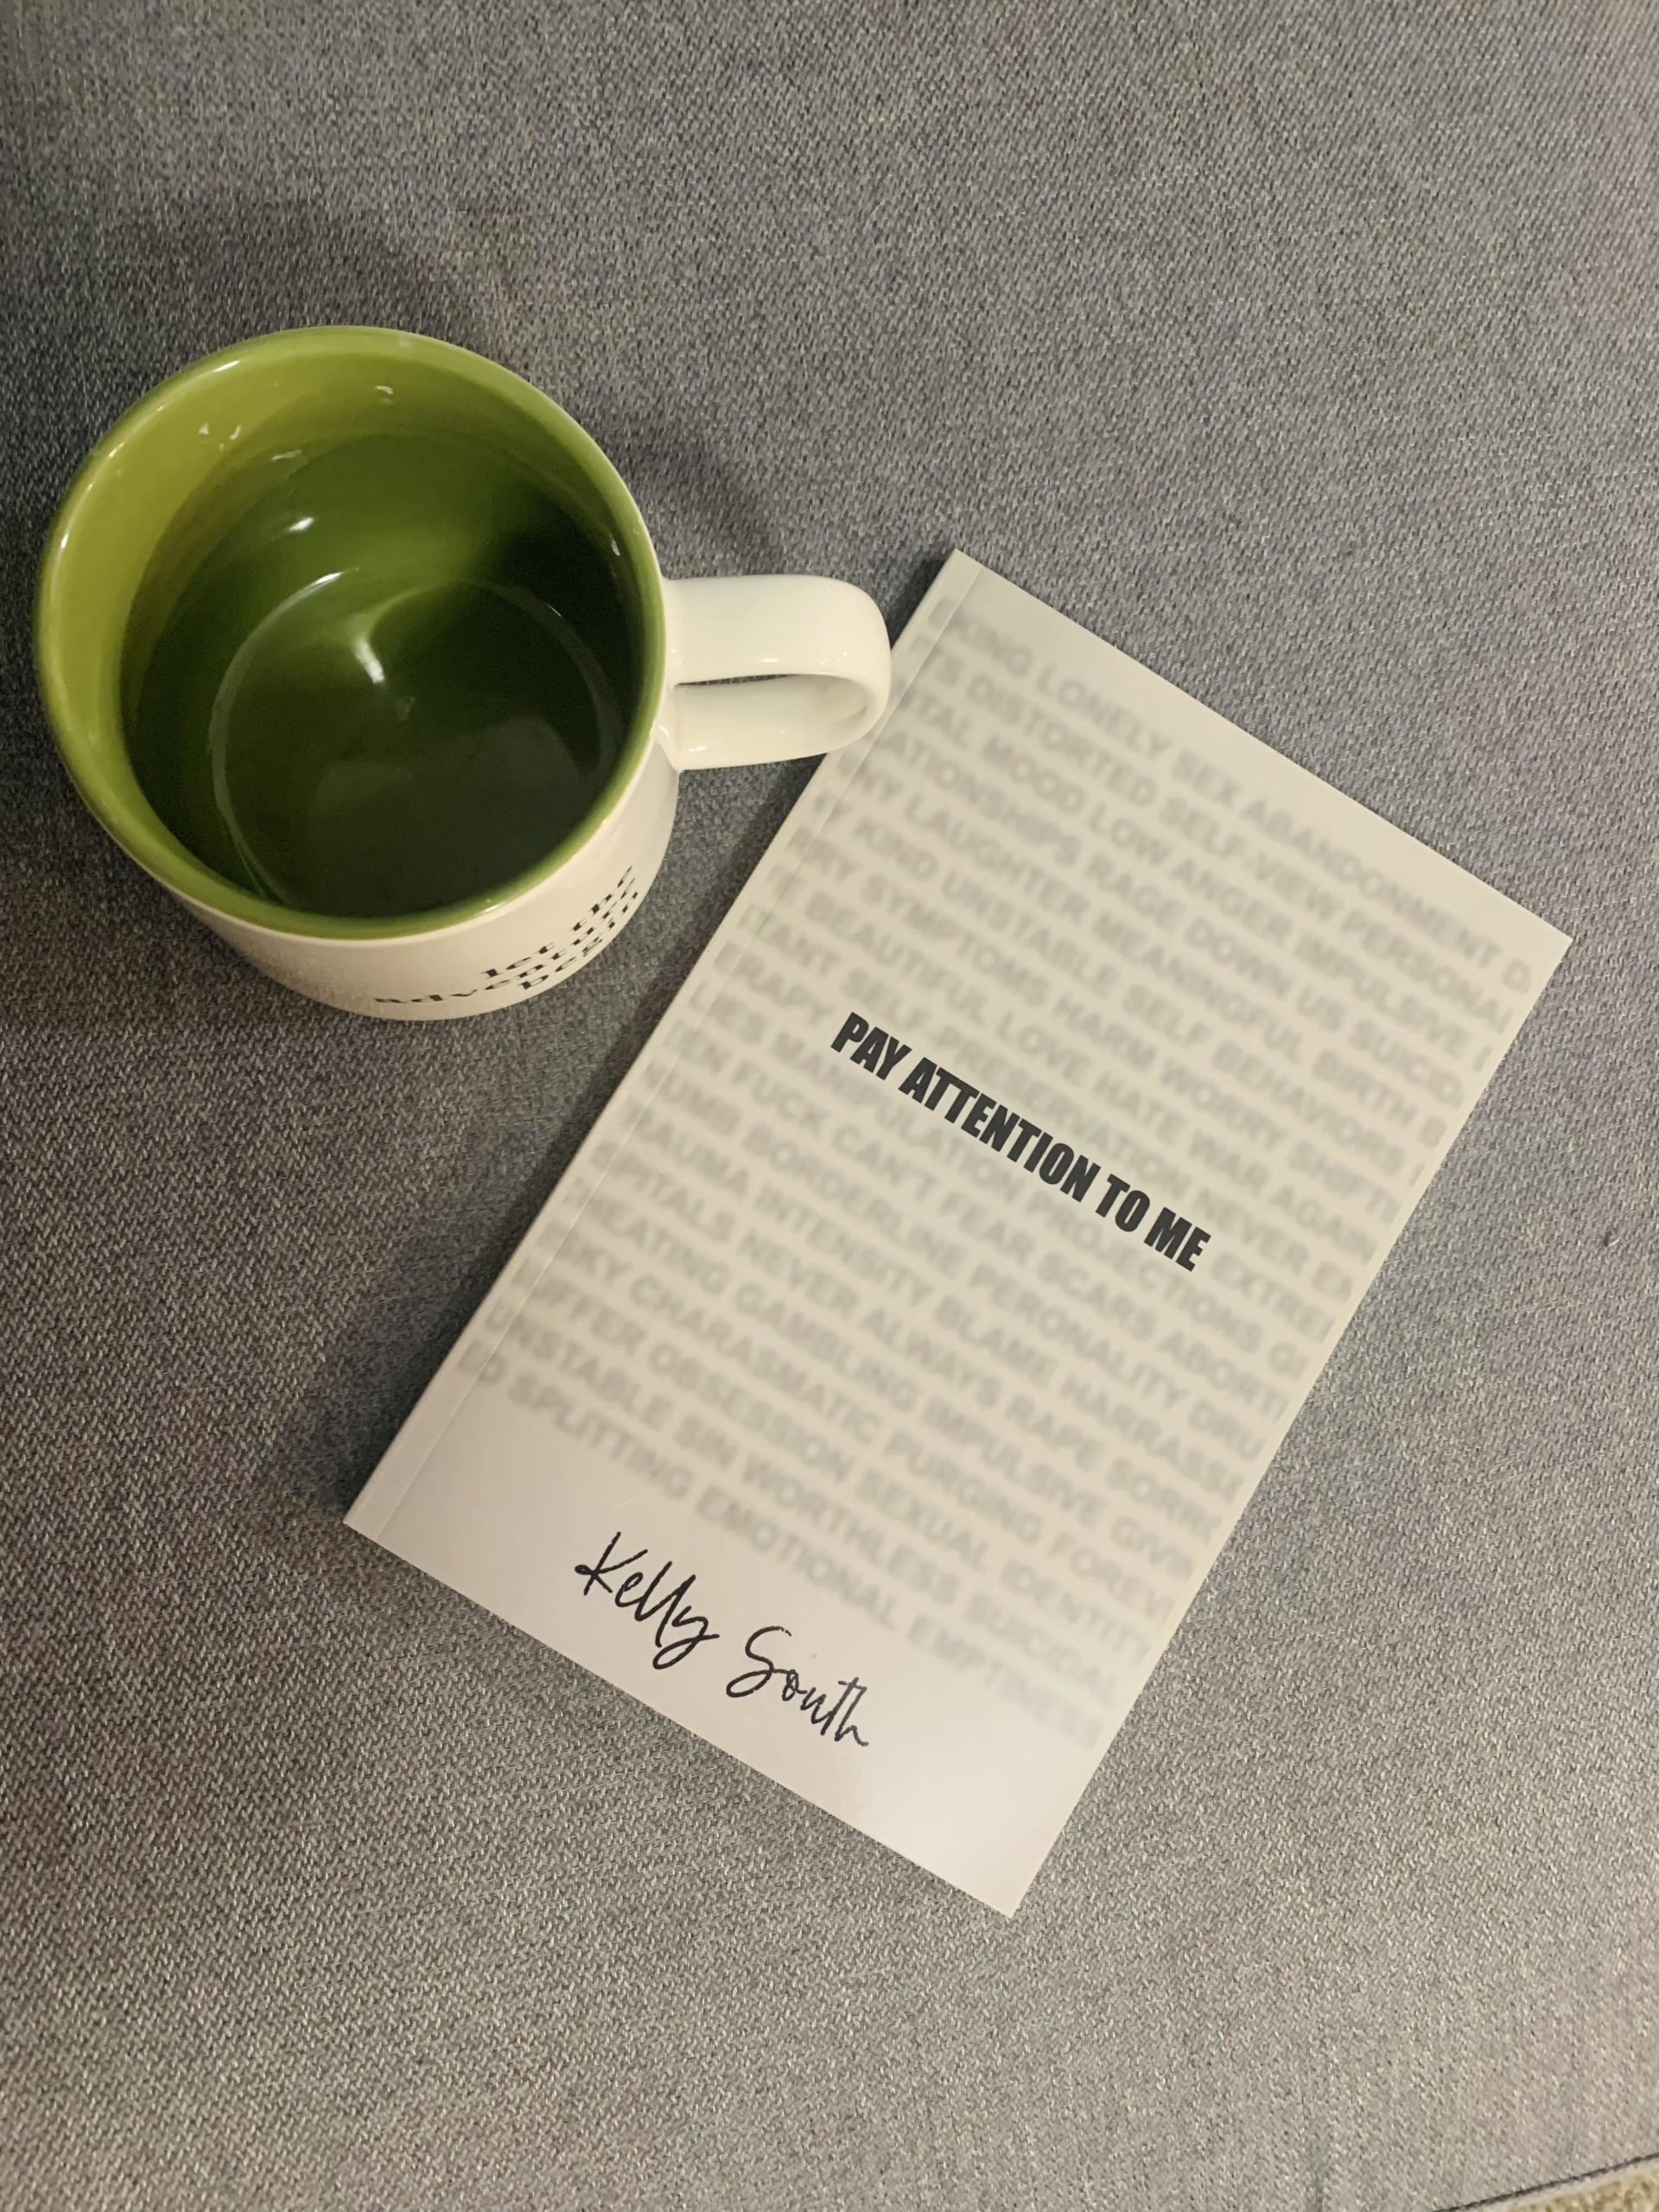 Photo of a book about BPD called Pay Attention to Me on a gray background next to a green & white mug